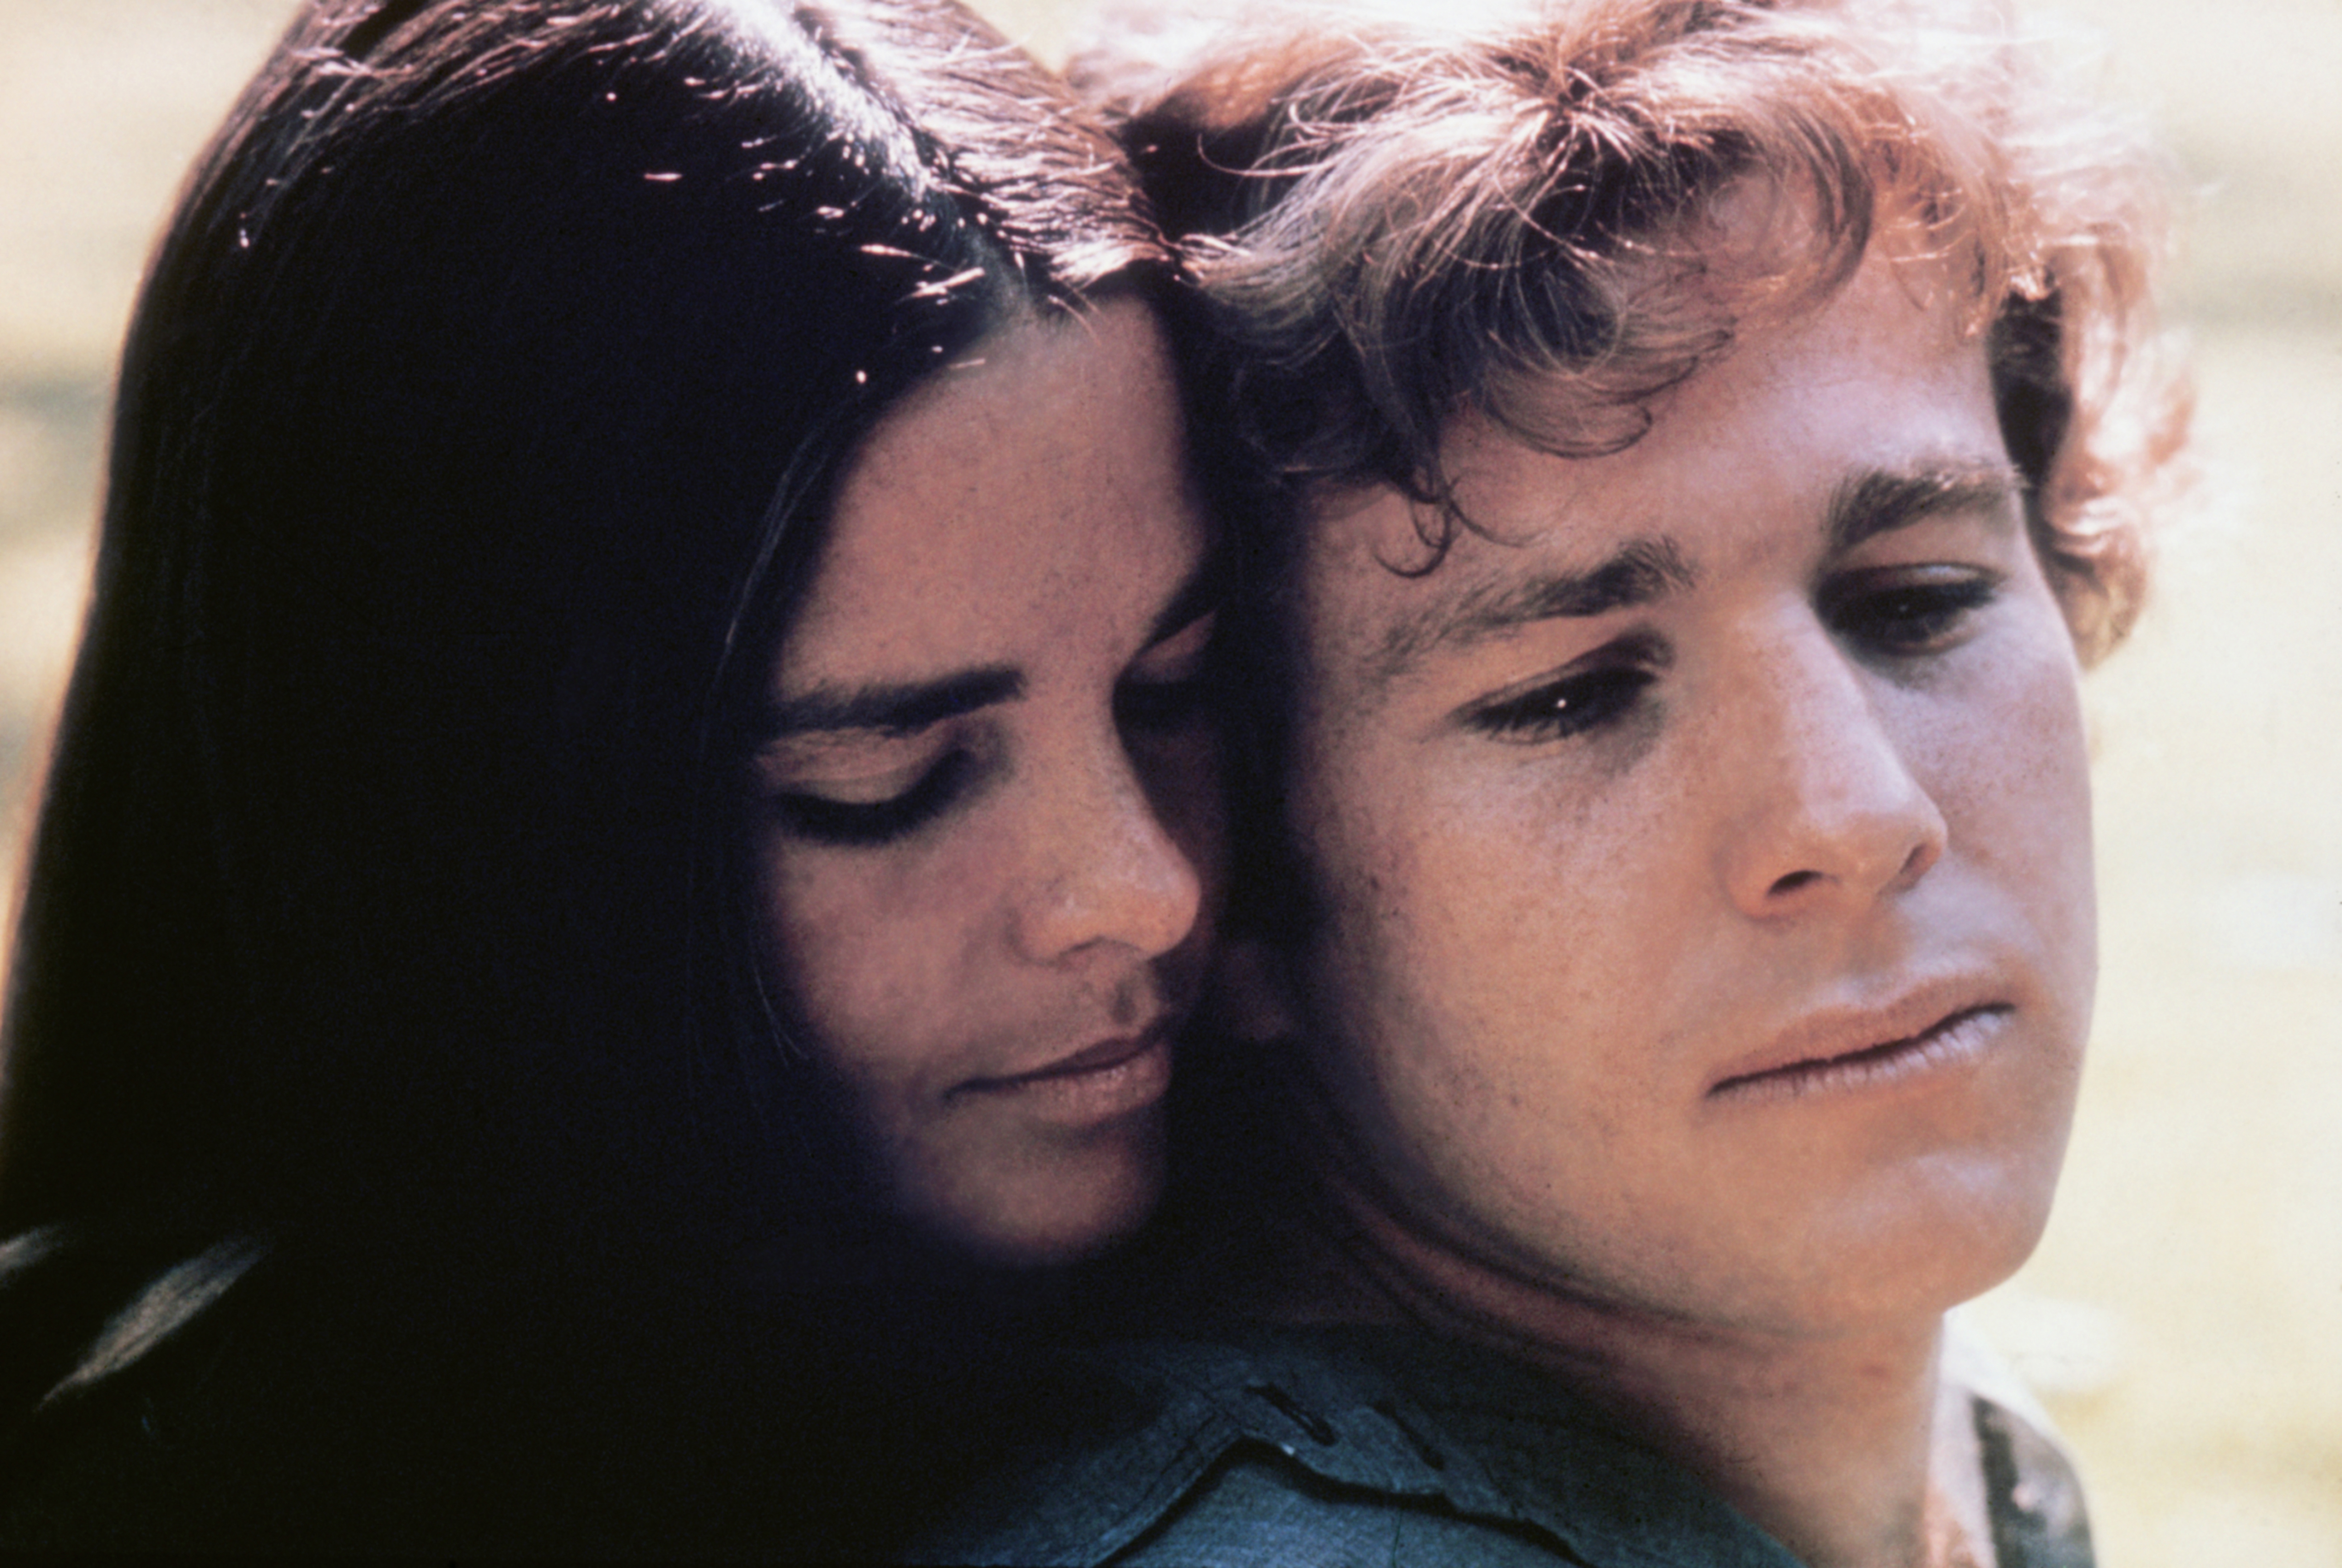 Ali MacGraw as Jennifer Cavalleri and Ryan O'Neal as Oliver Barrett IV in a scene from "Love Story," circa 1970 | Source: Getty Images